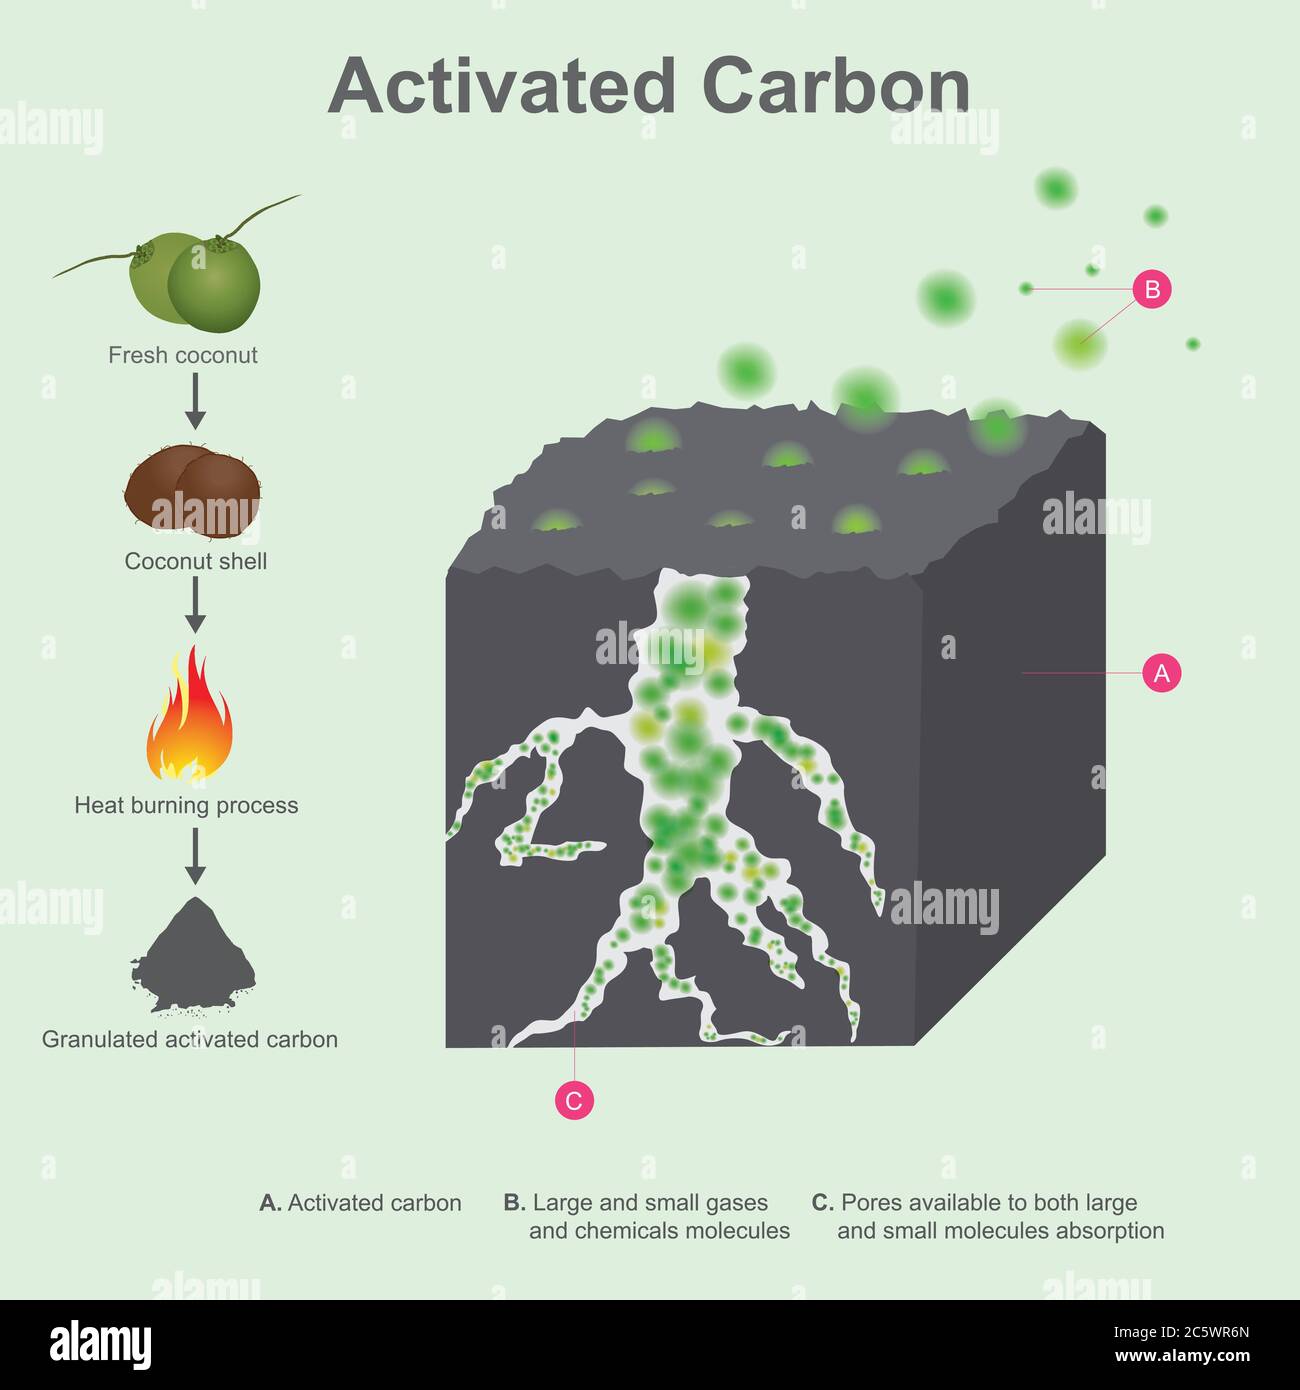 Activated Carbon. After coconut shell burning and grind into small pieces, the results an activated carbon, it have property absorb gases and smell. Stock Vector